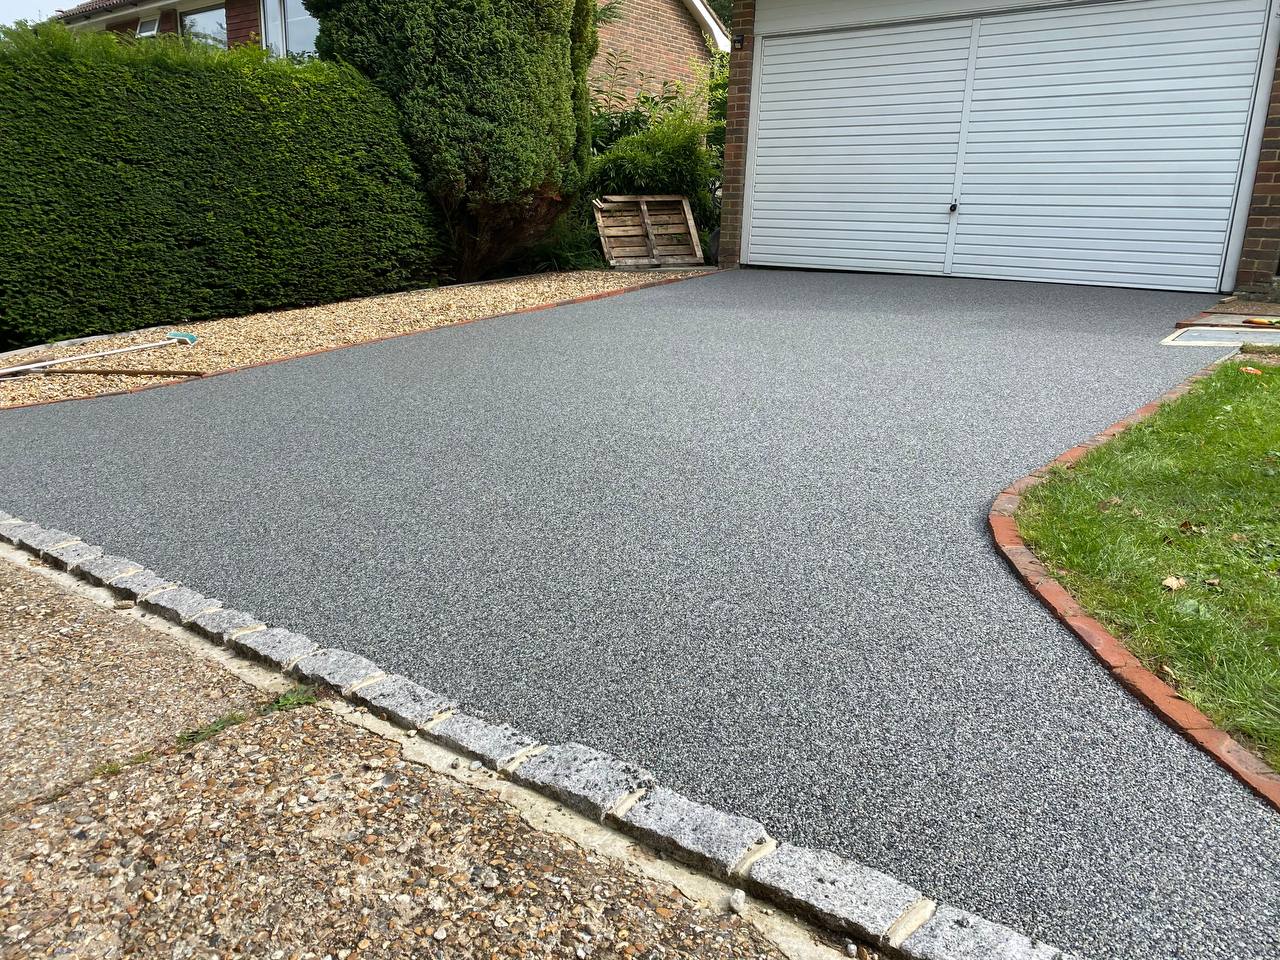 This is a photo of a new resin bound drive carried out in Cardiff. All works done by Resin Driveways Cardiff